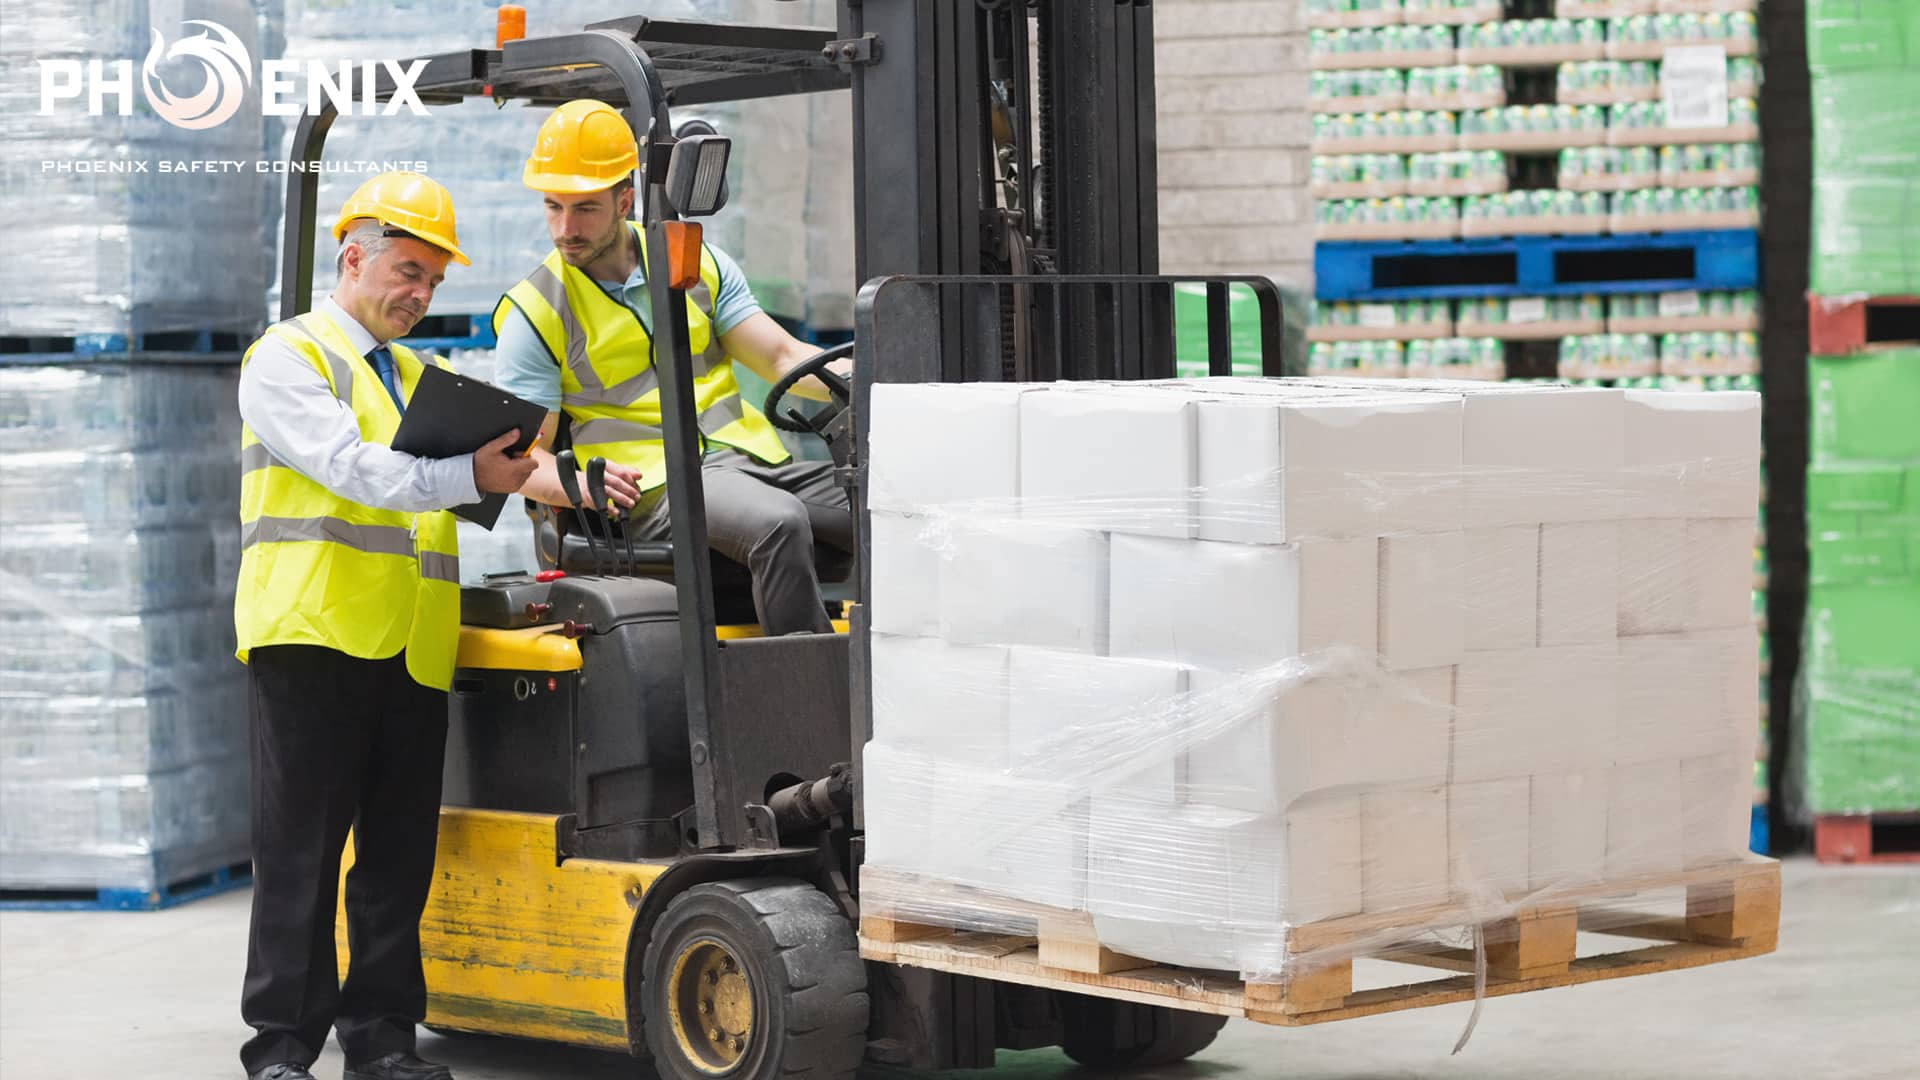 Forklift Safety and Safe Operations